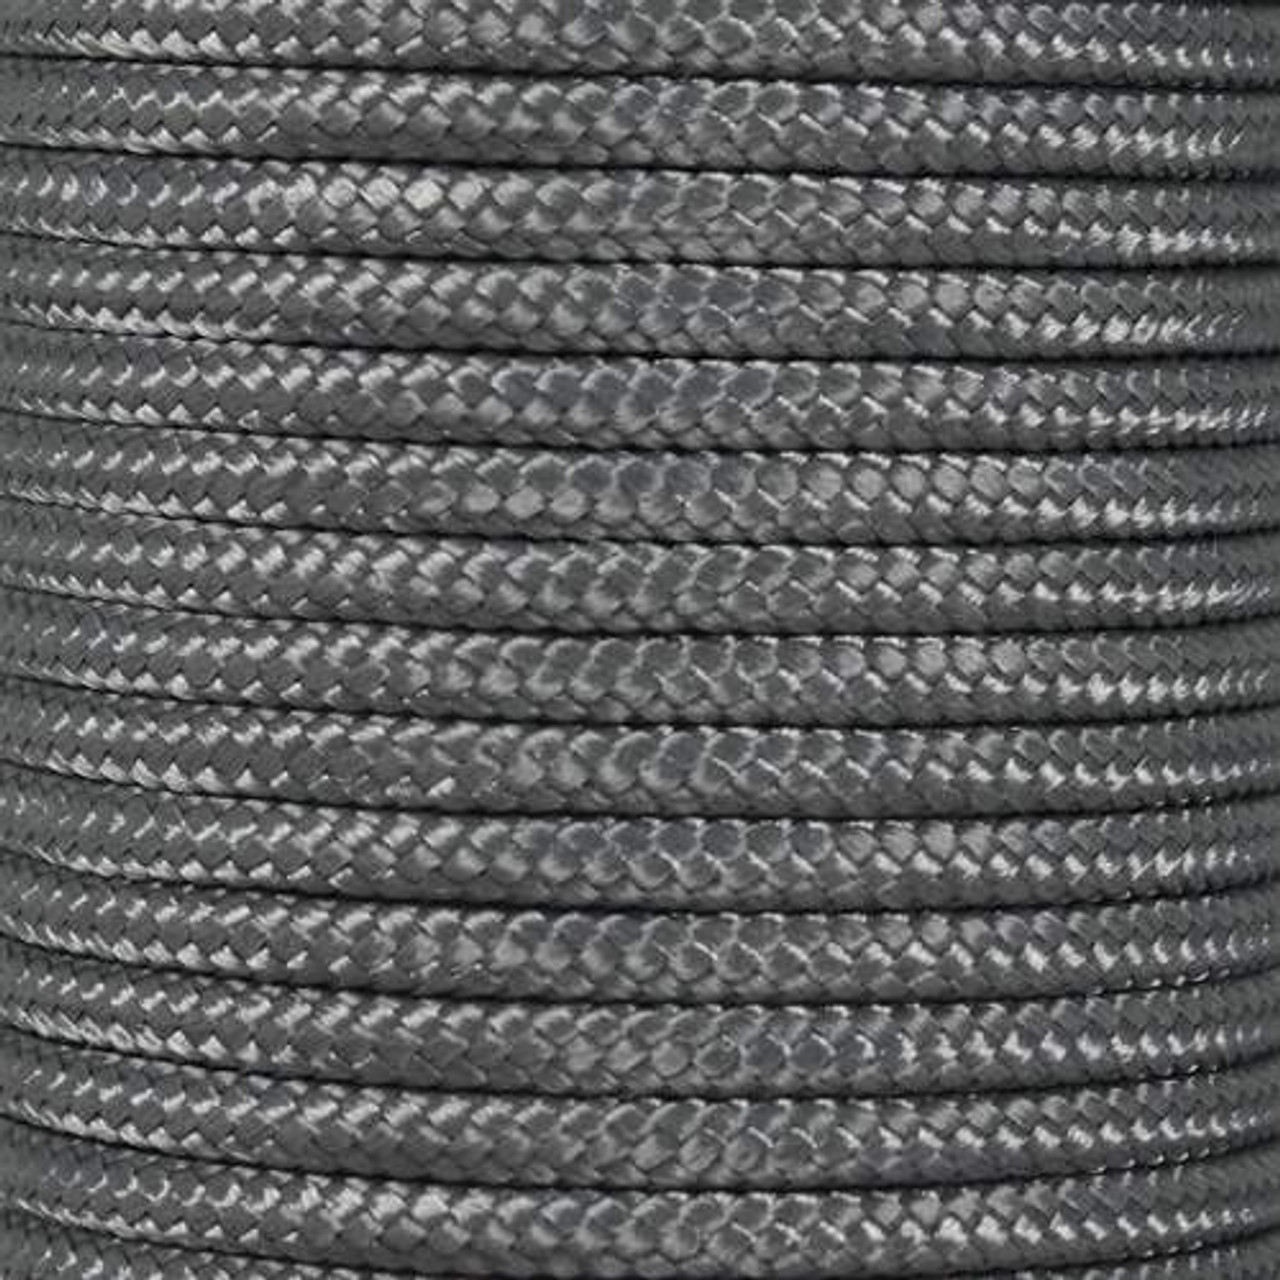 425 Reflectable - Paracord 425 Type II - Paracord